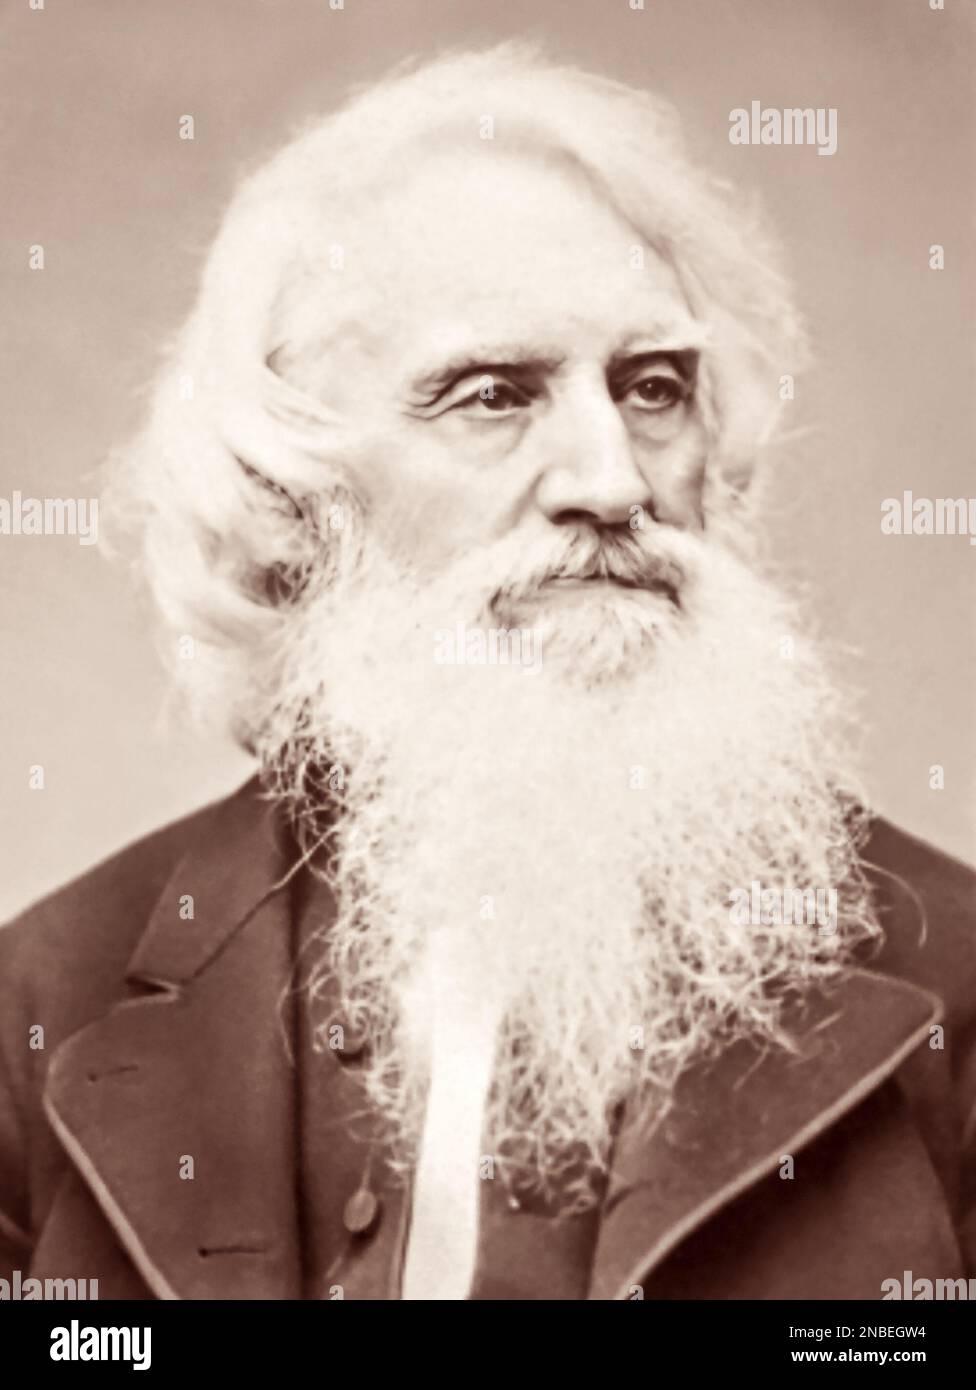 Samuel F.B. Moorse  (1791-1872), American artist and inventor of the single wire telegraph and co-inventor of the Morse code. (USA) Stock Photo